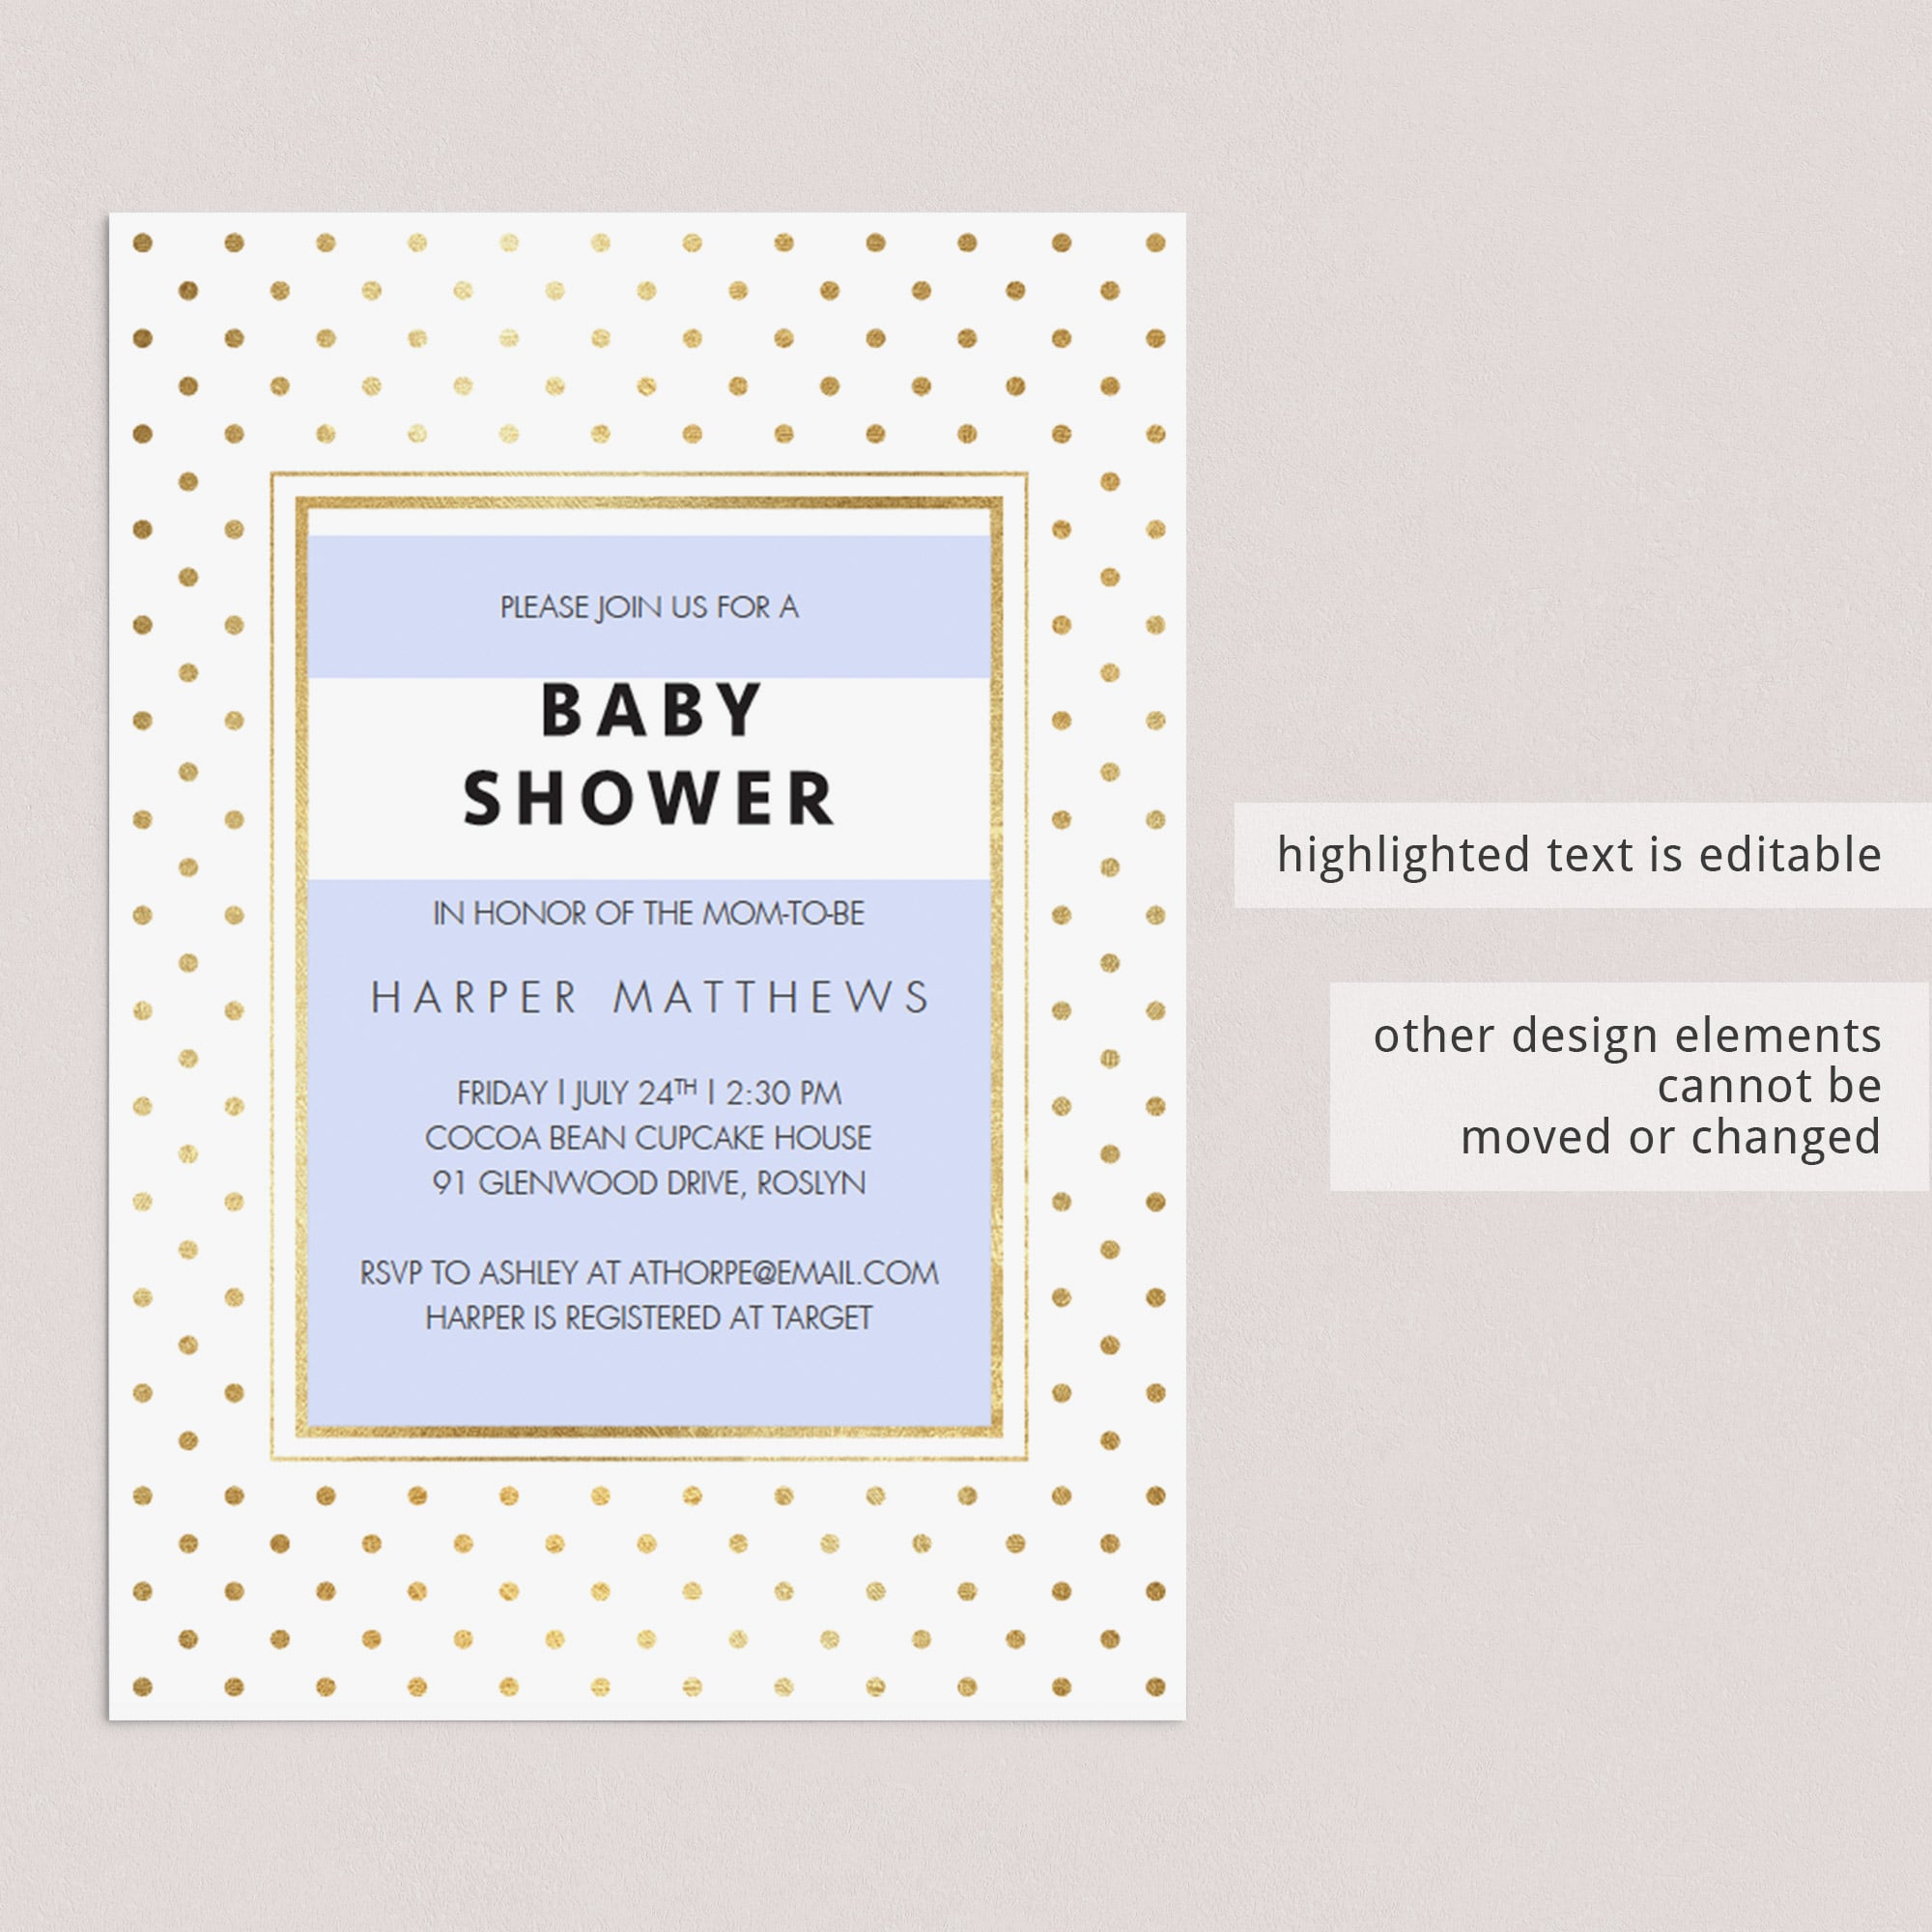 Make your own baby shower invitations with this gold baby shower invitation template by LittleSizzle